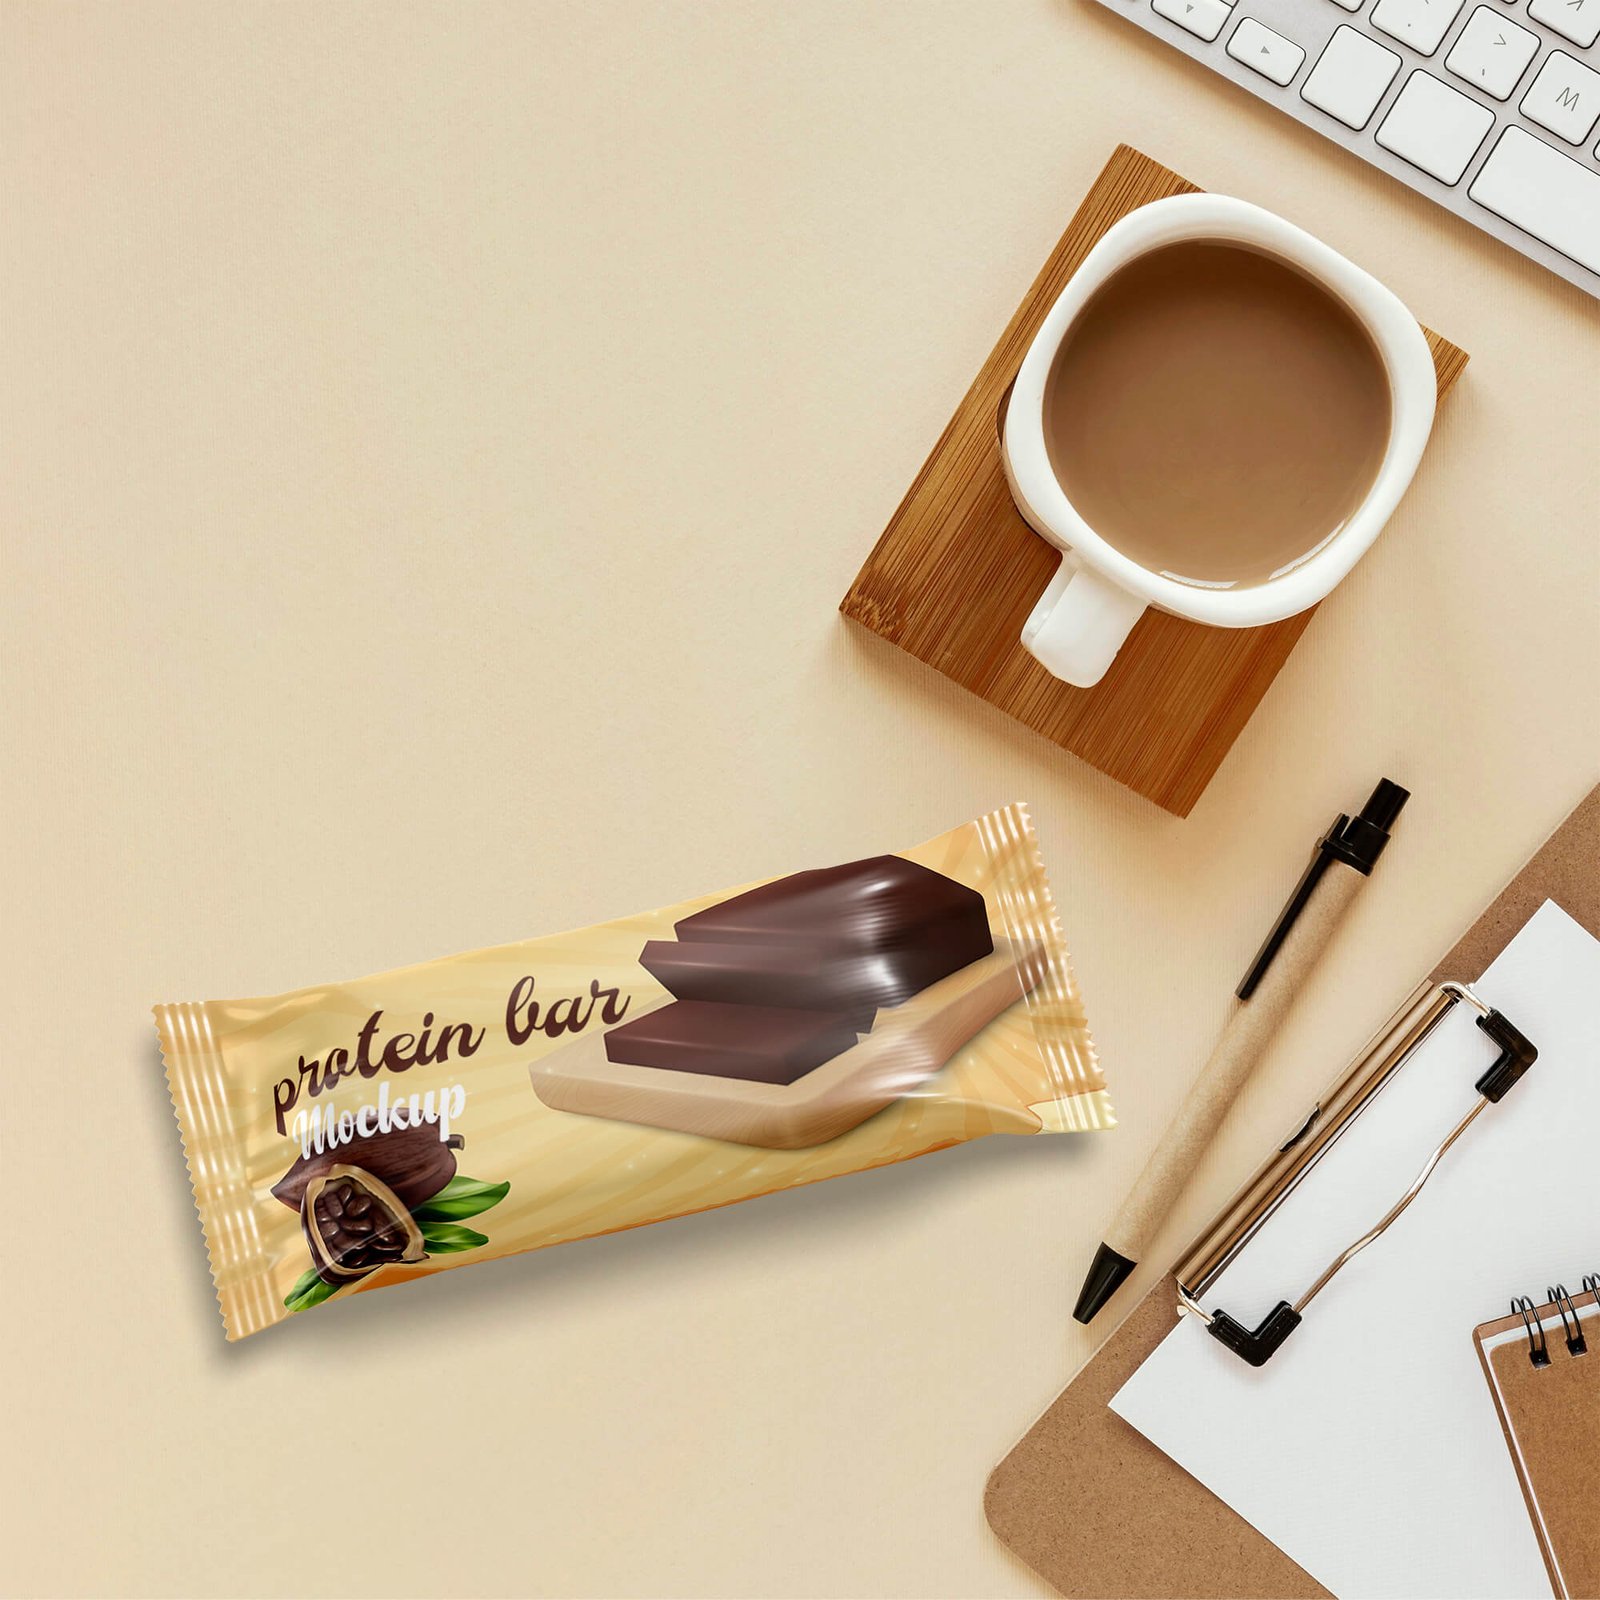 Free Protein Bar Mockup PSD Template